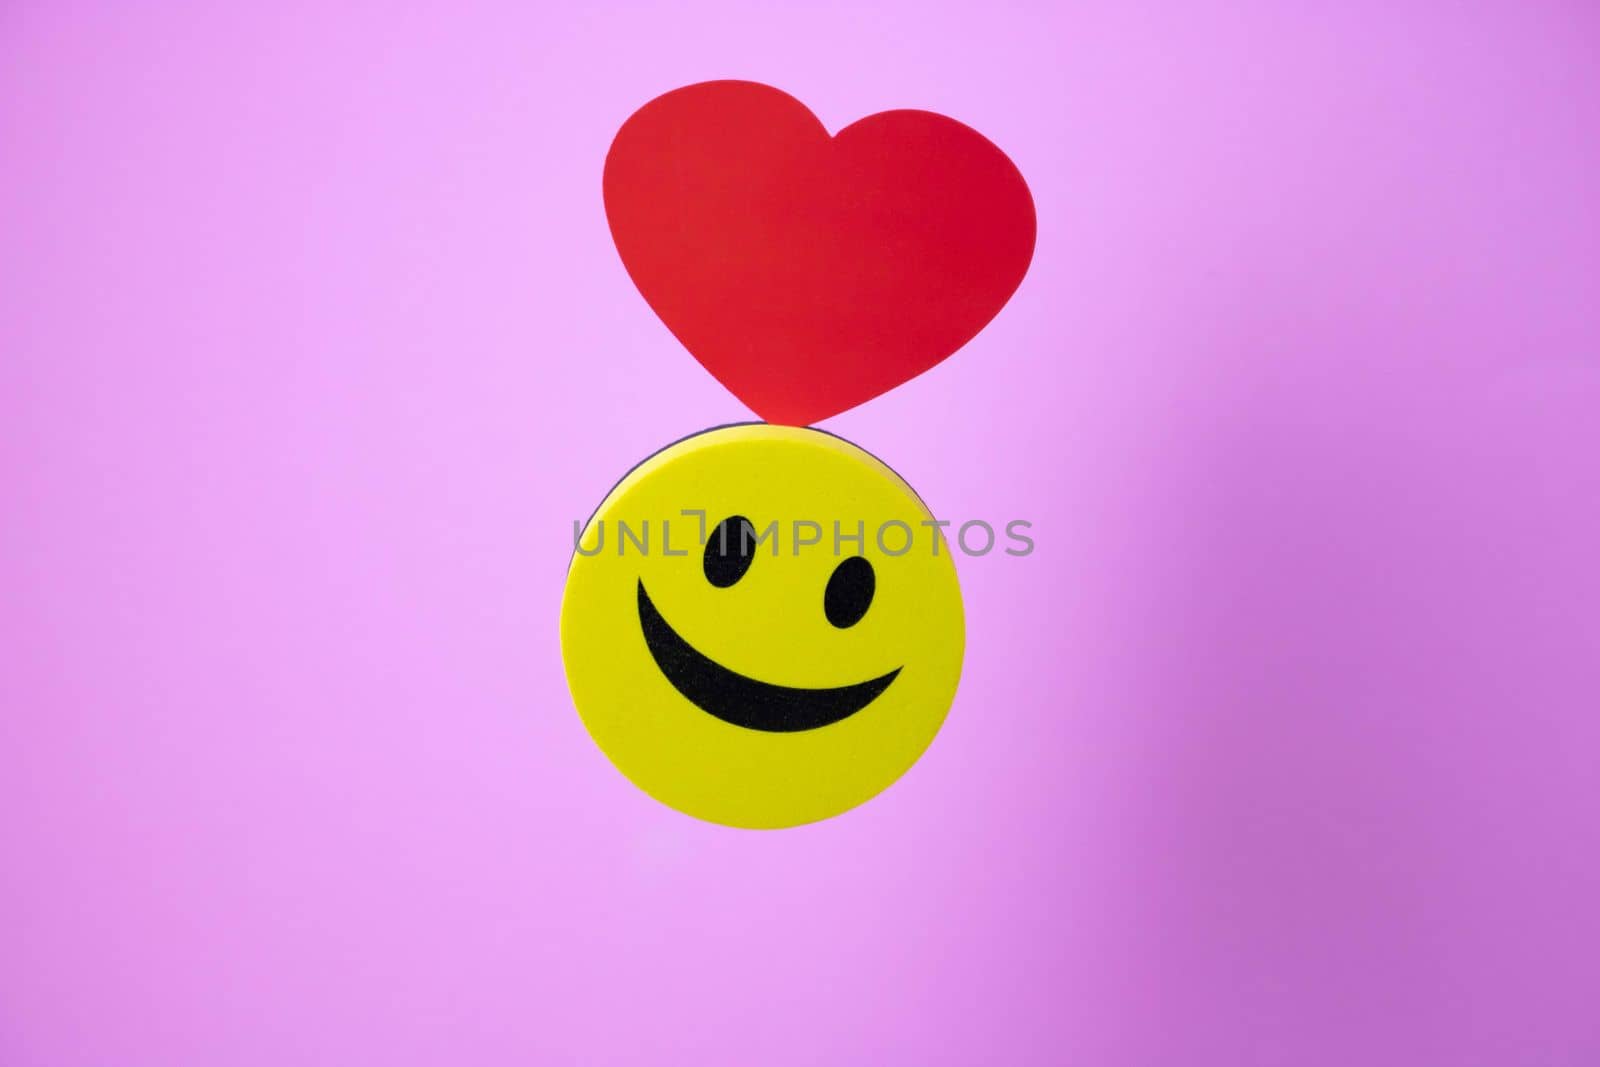 Smiley face with a red heart and its shadow on a pink background by lapushka62